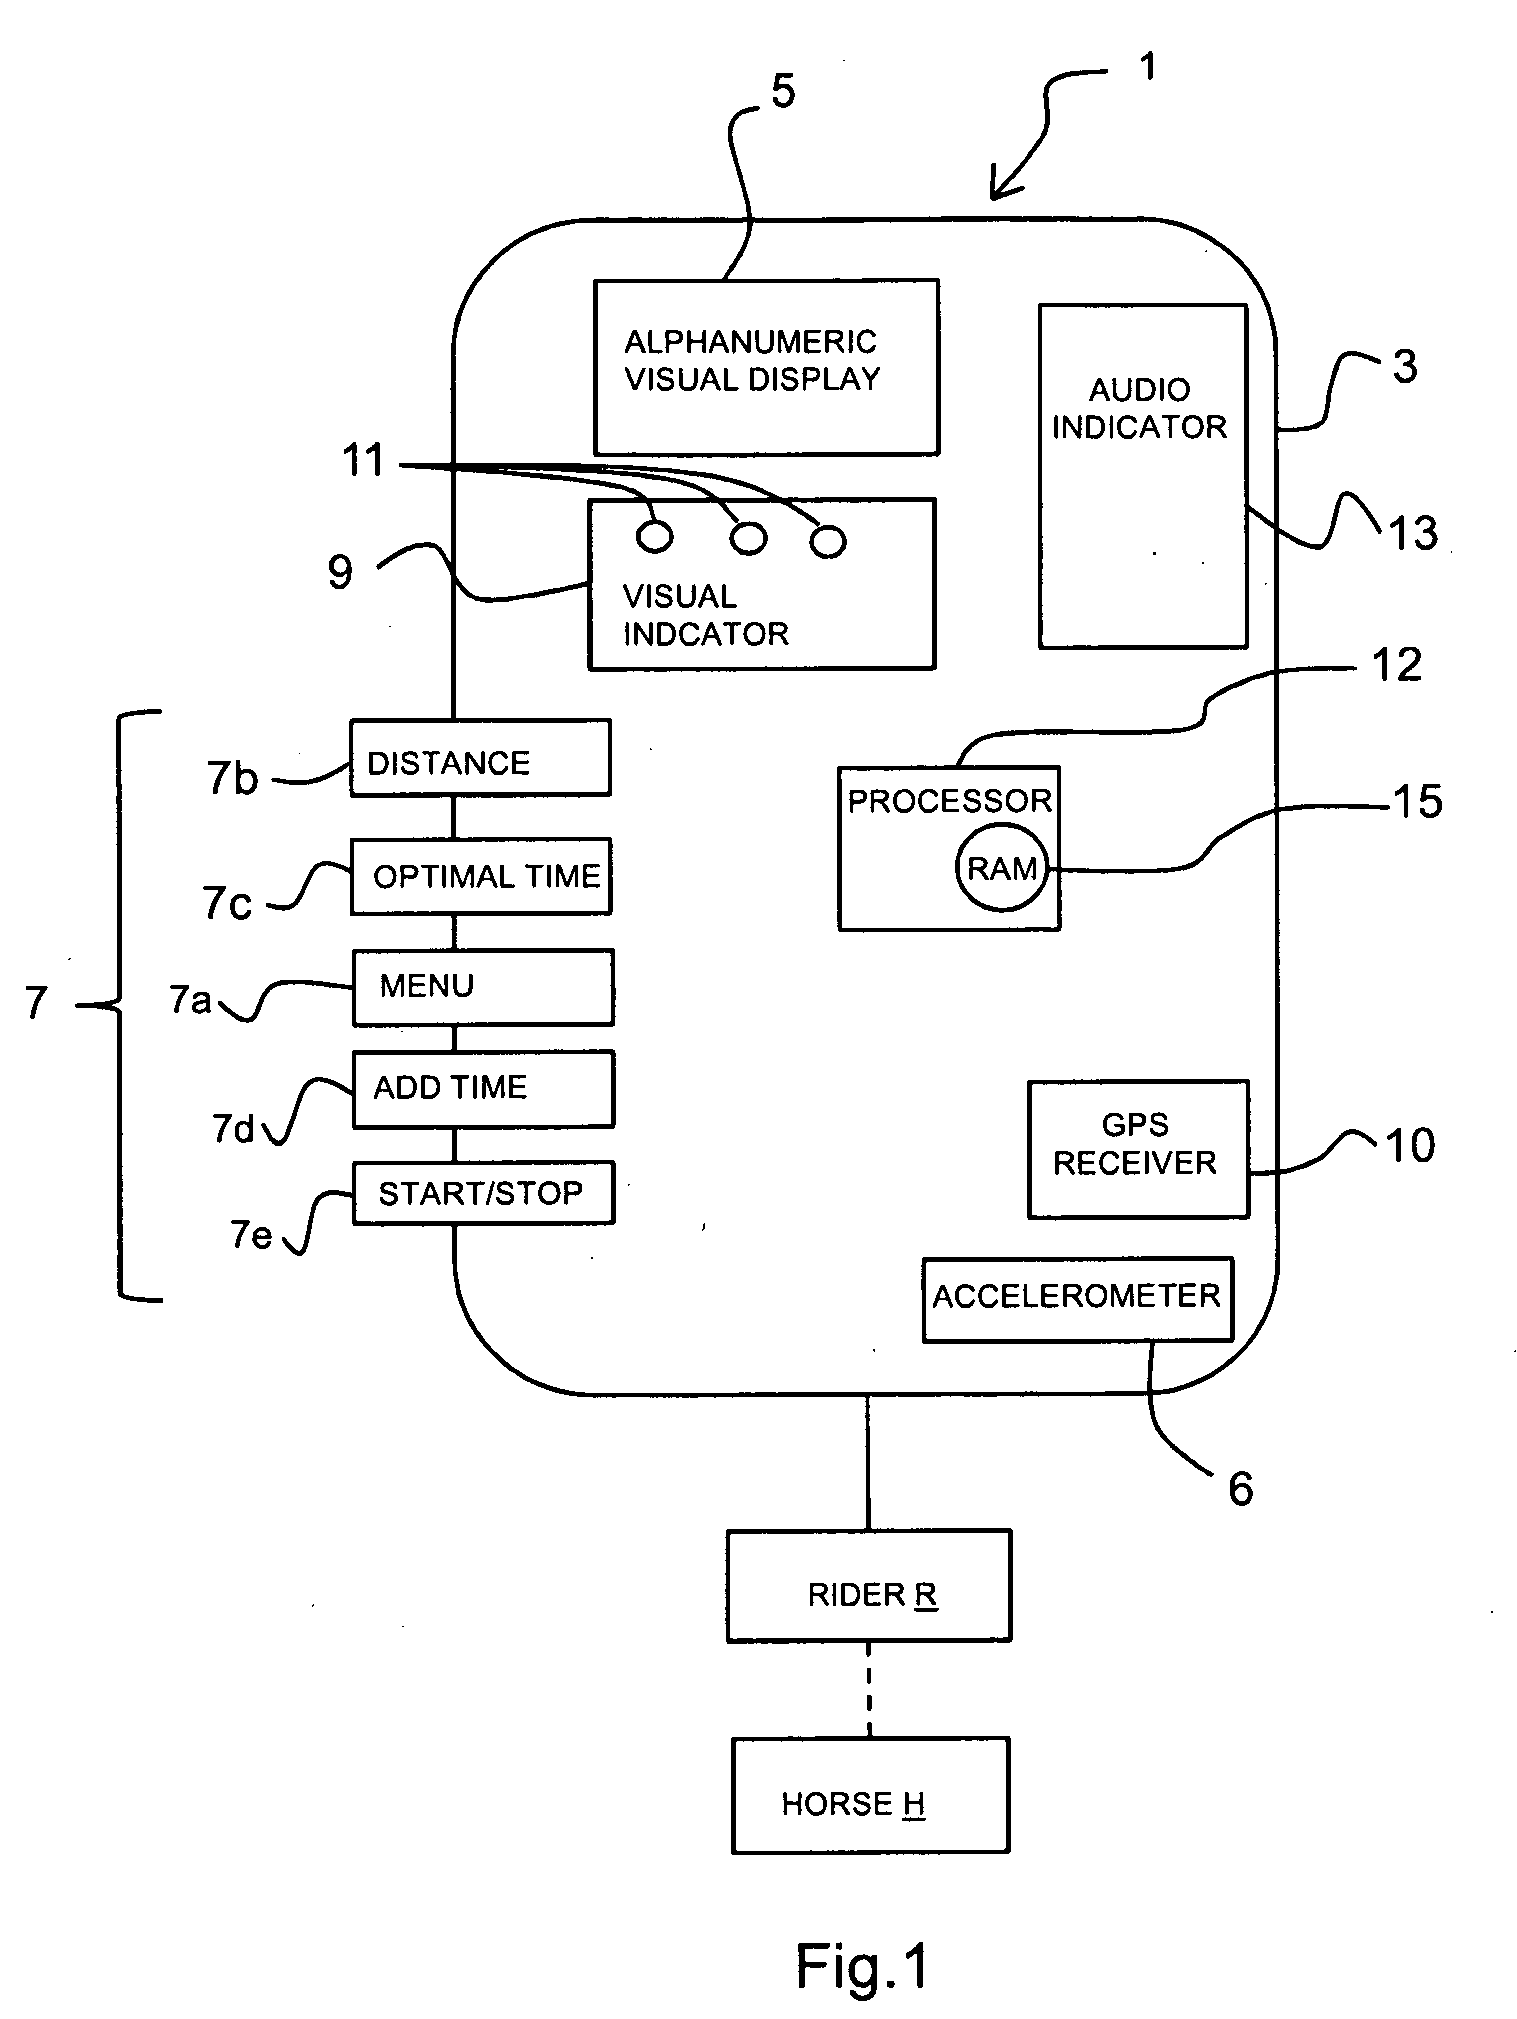 Method and apparatus for measuring and estimating subject motion in variable signal reception environments